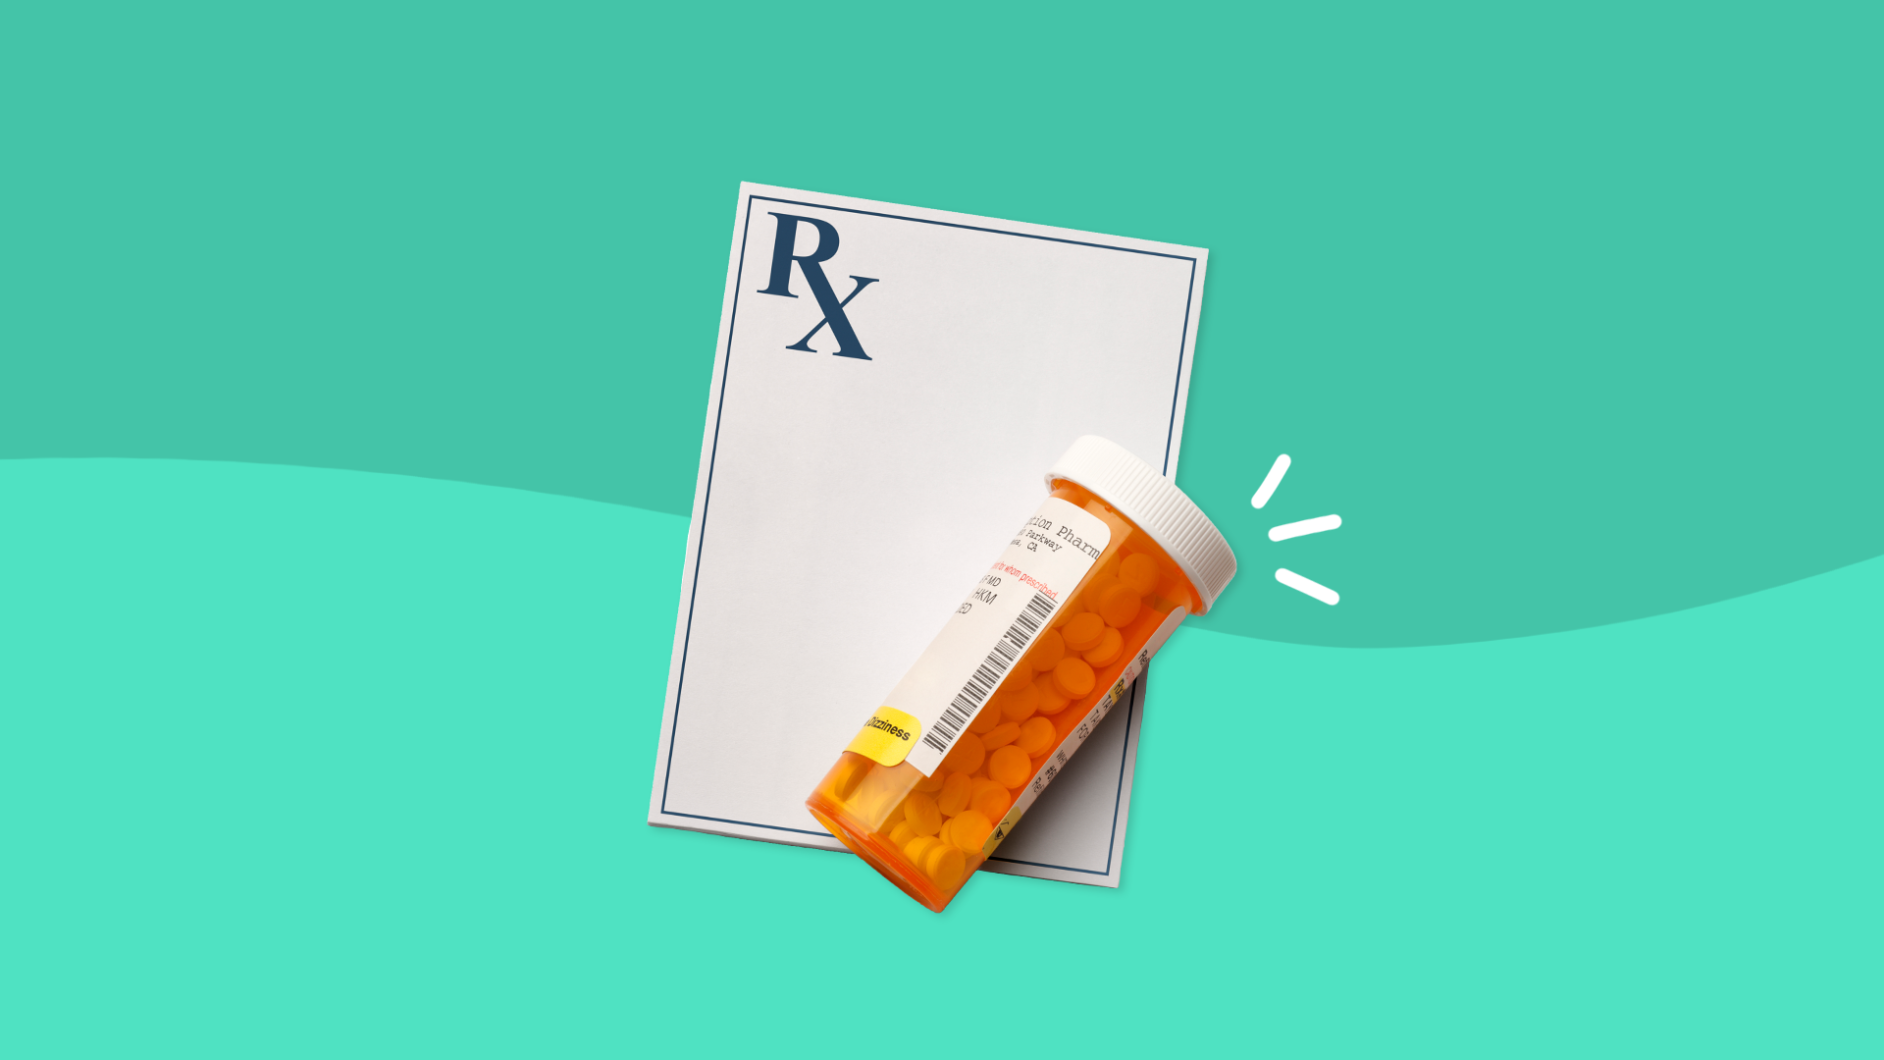 Prescription pad with pill bottle: Common vs. serious Valsartan side effects